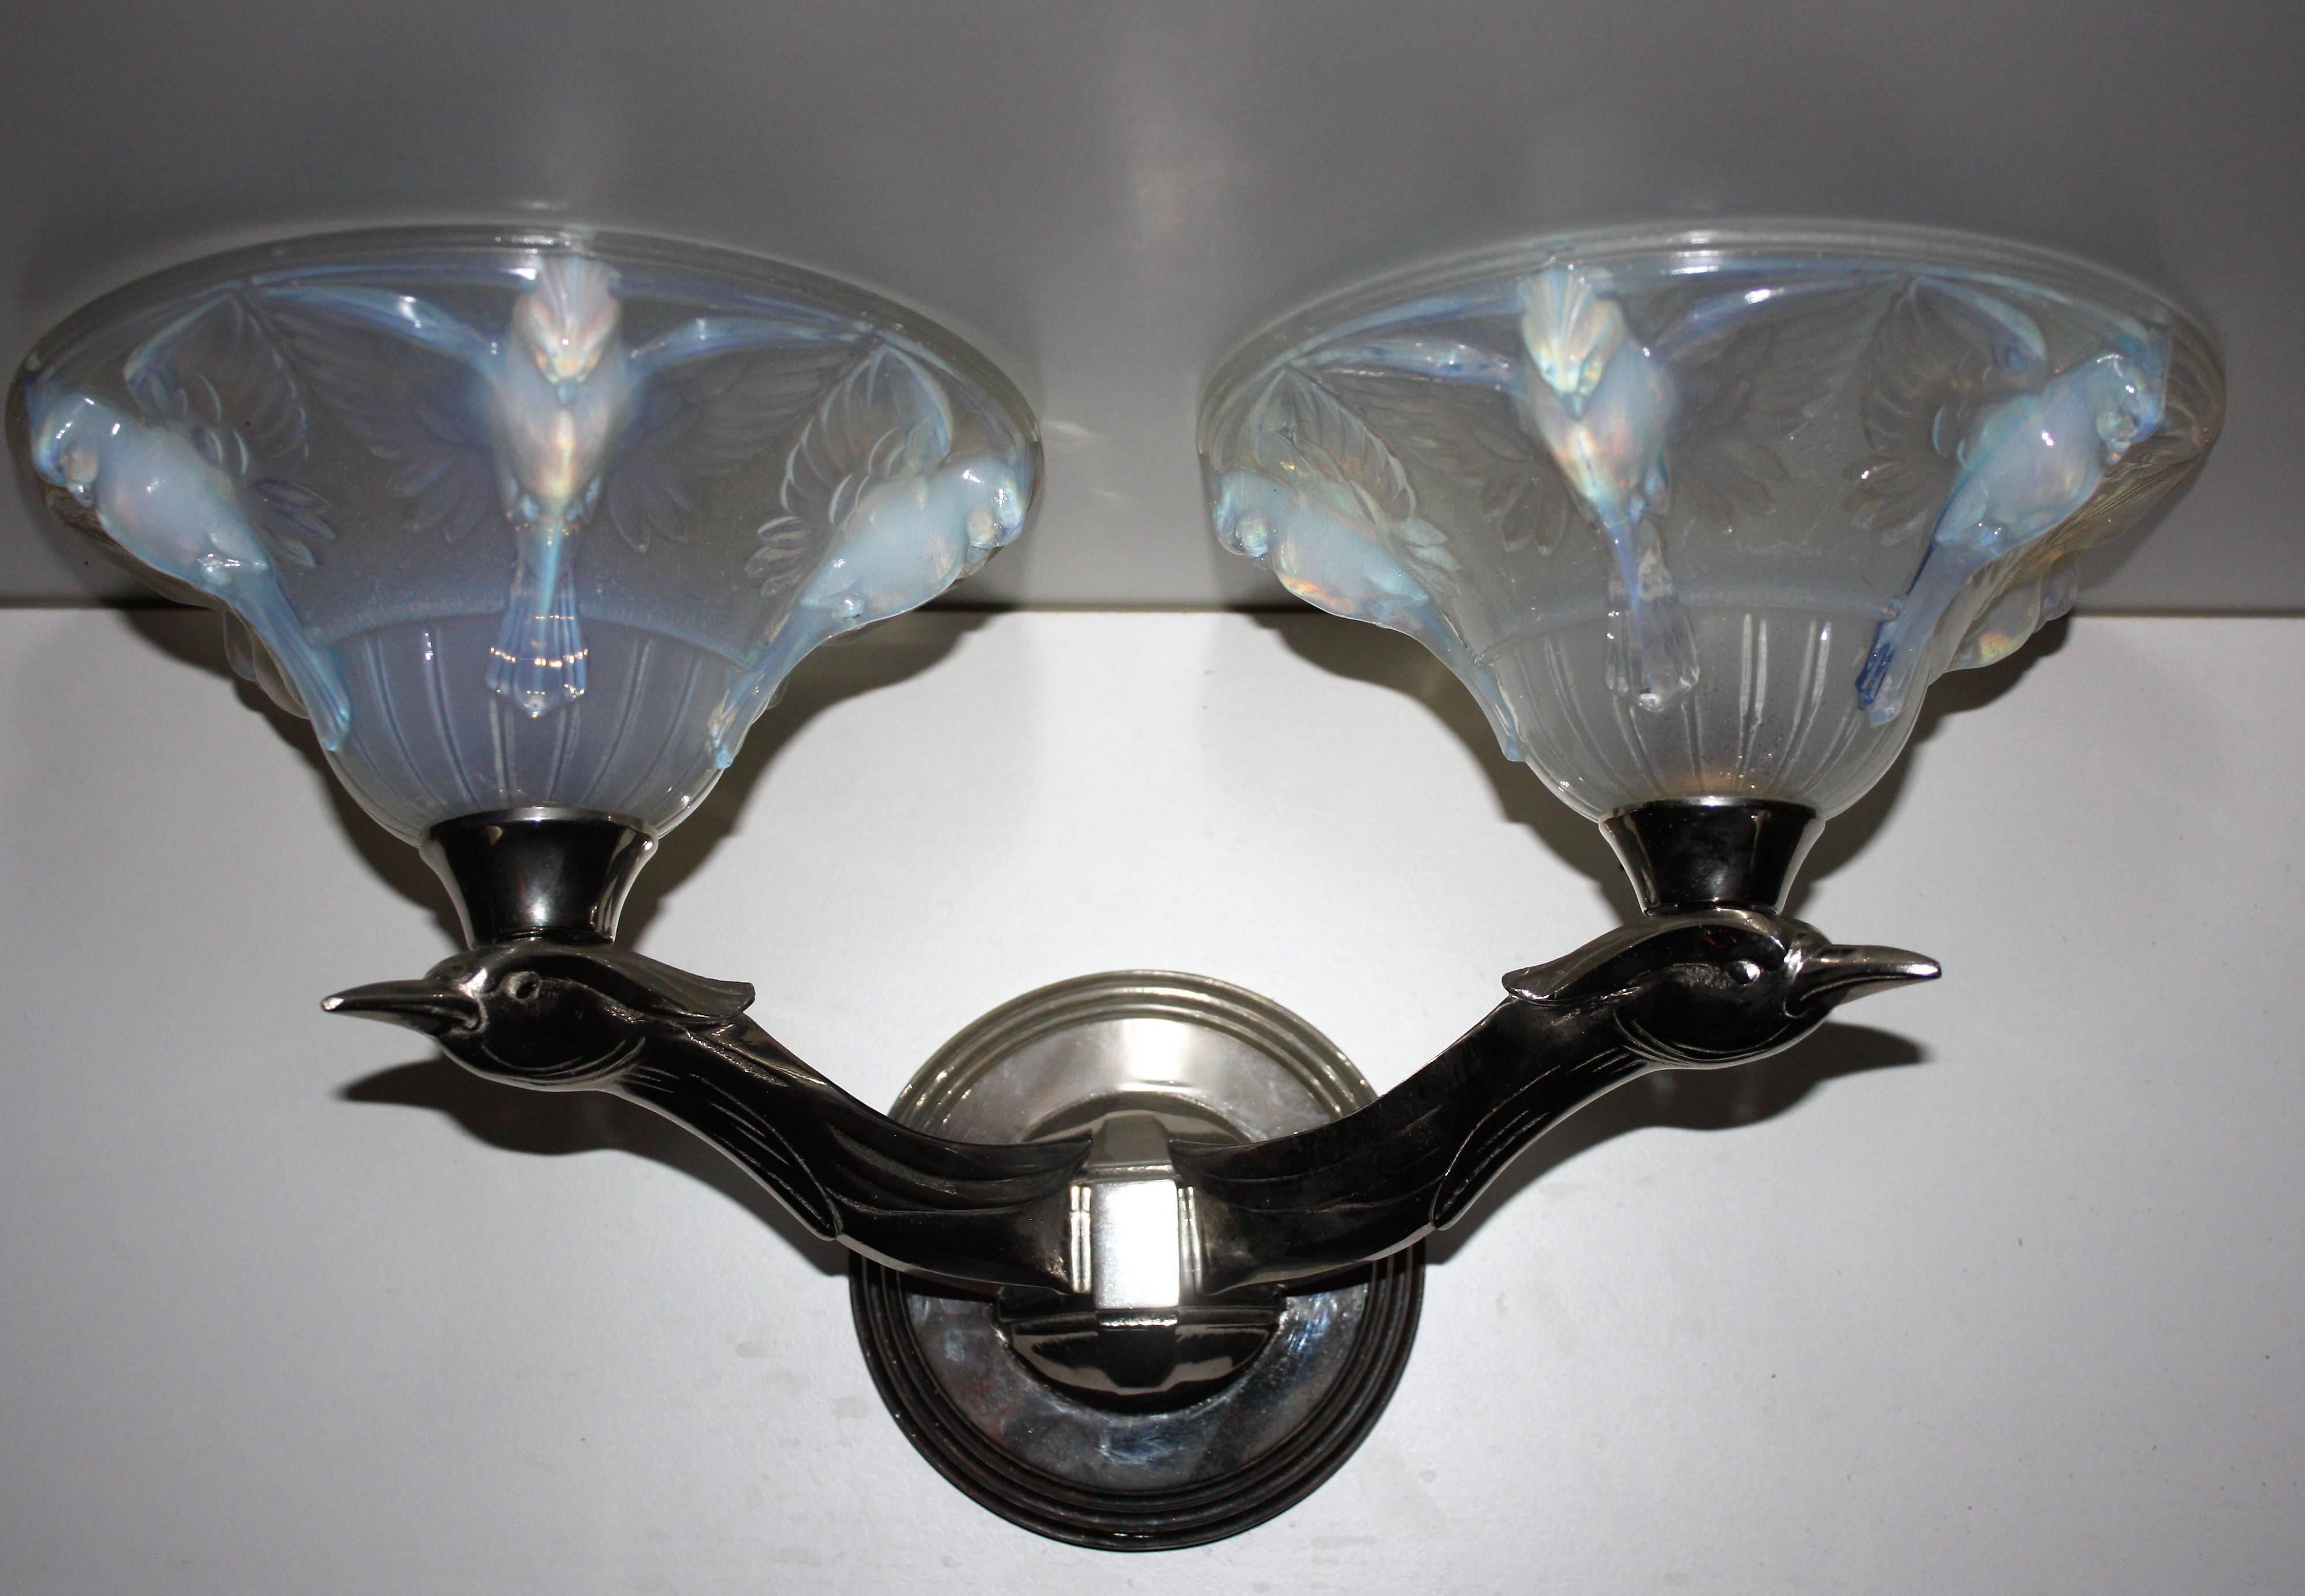 Stunning pair of French wall sconces, nickeled soild bronze frame and opalescent glass shades , signed -LA
Excellent condition.